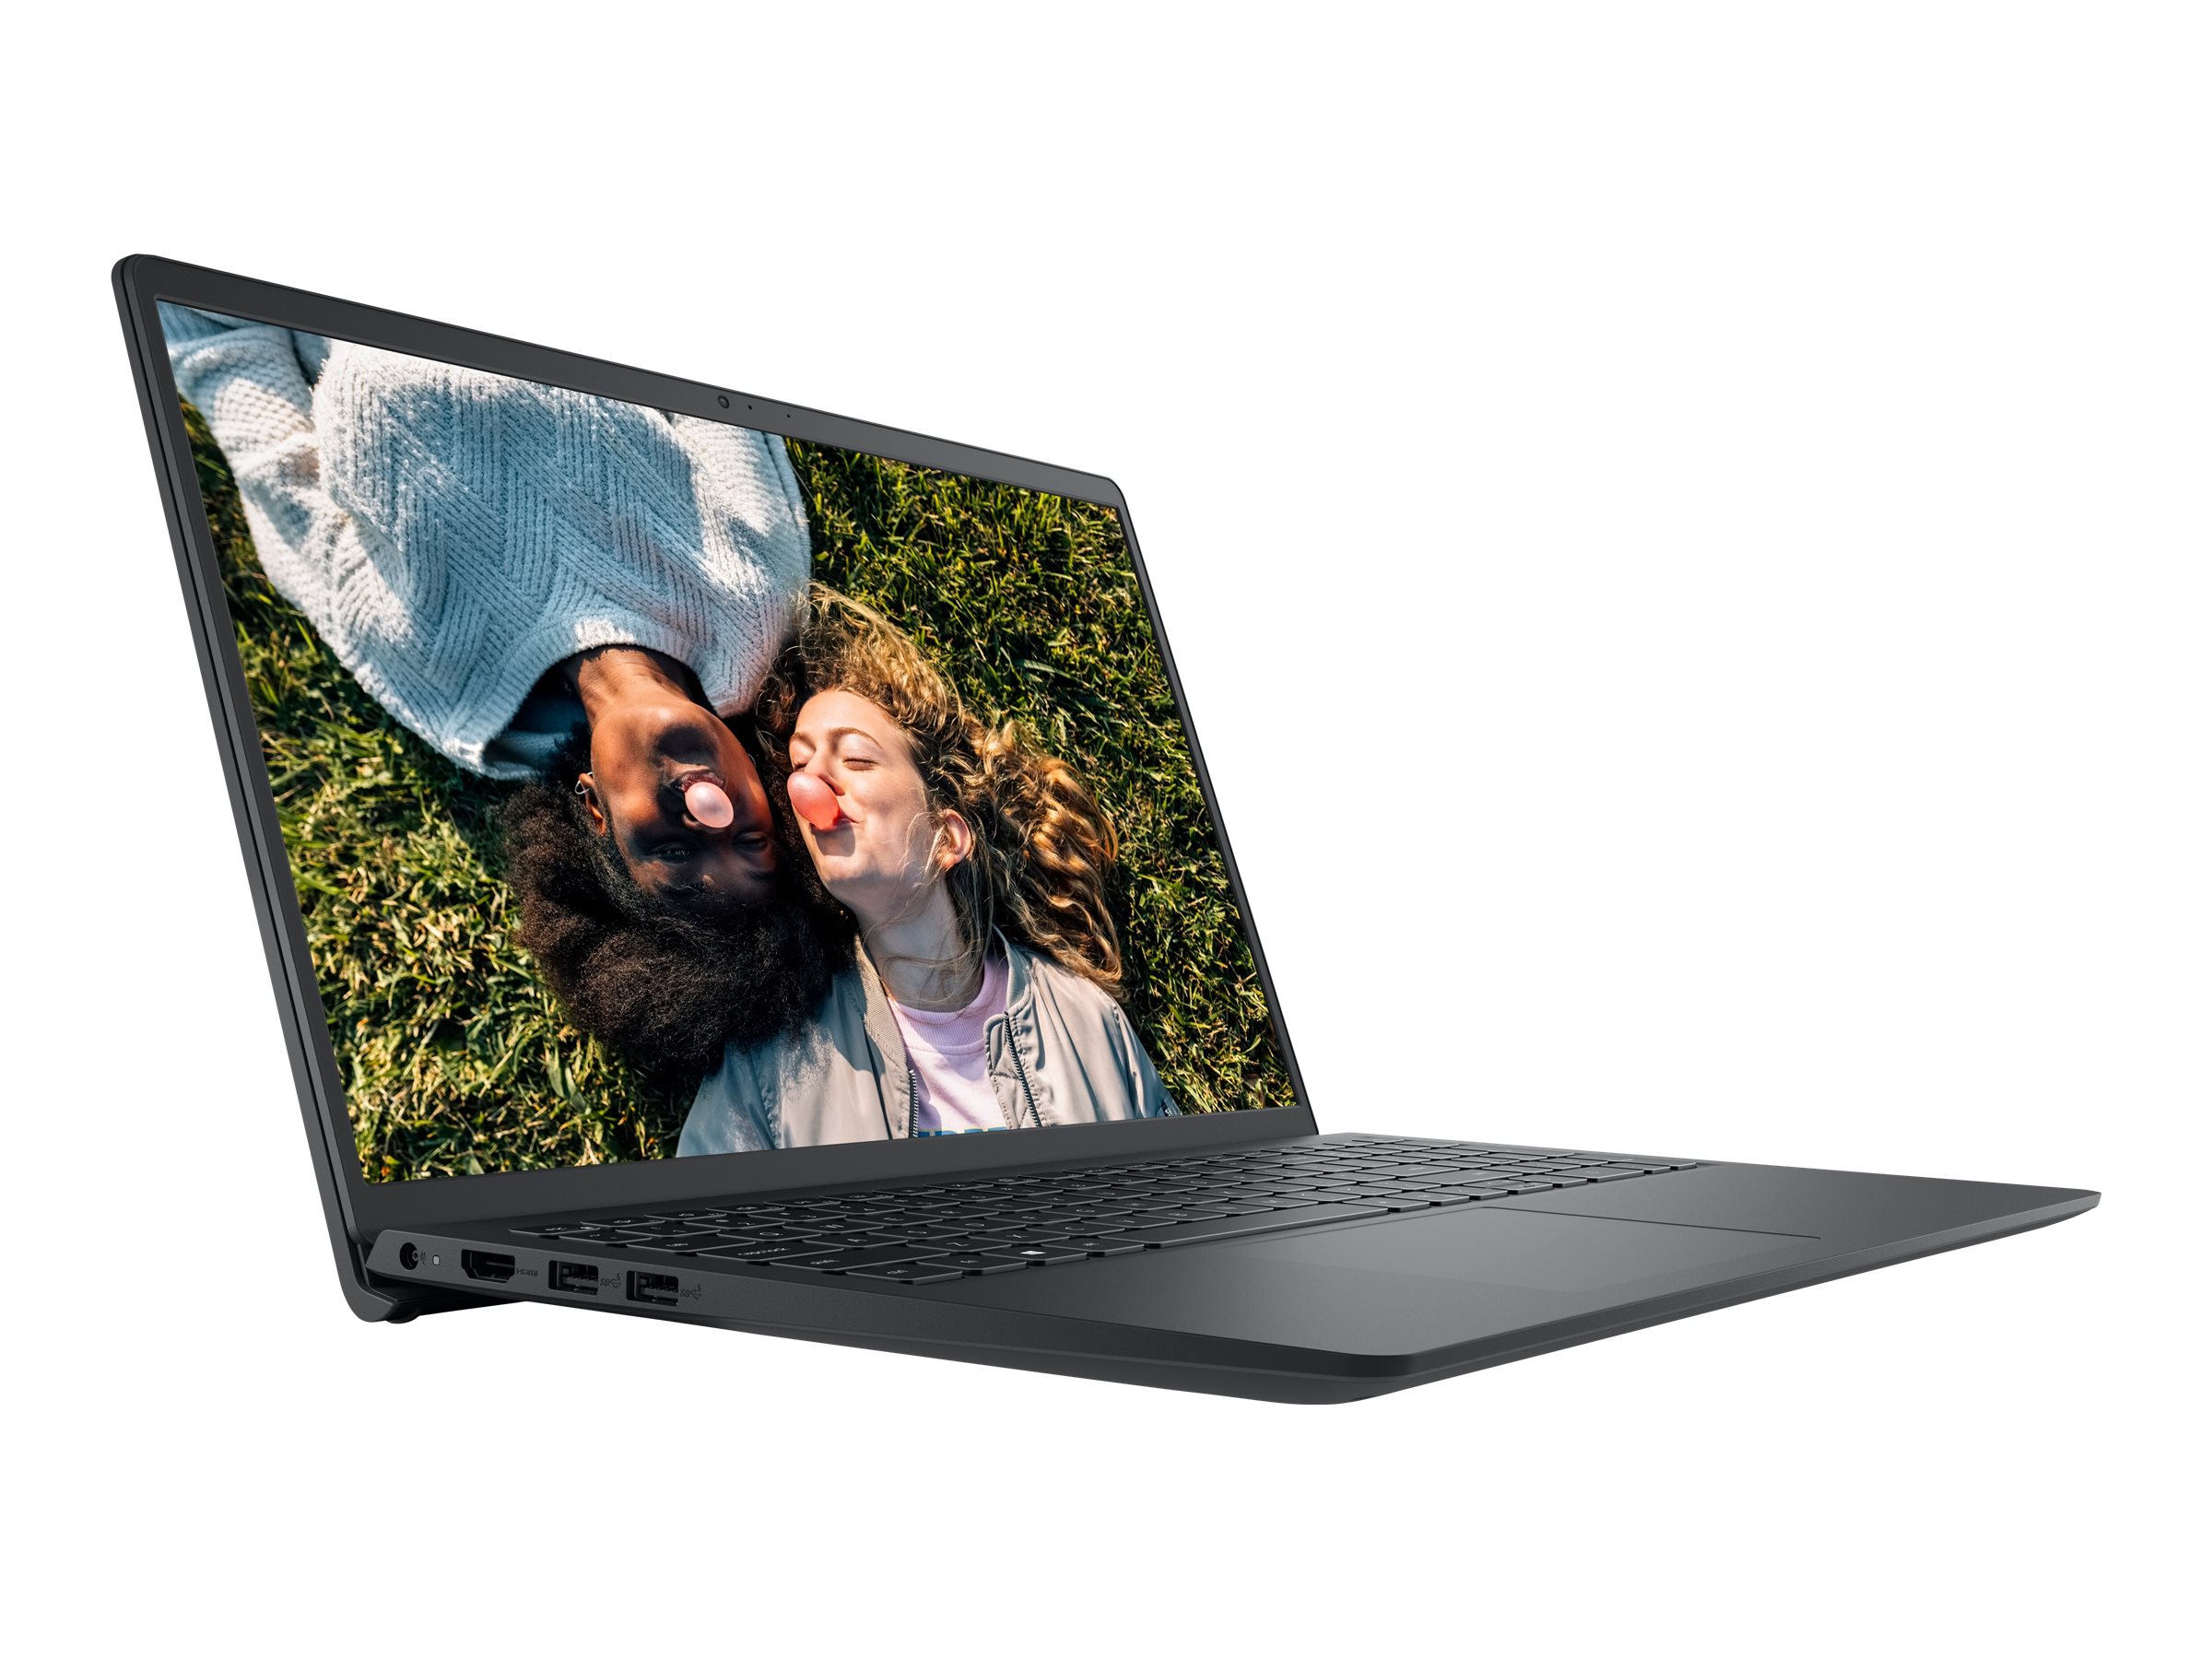 Dell Inspiron 3502 - full specs, details and review